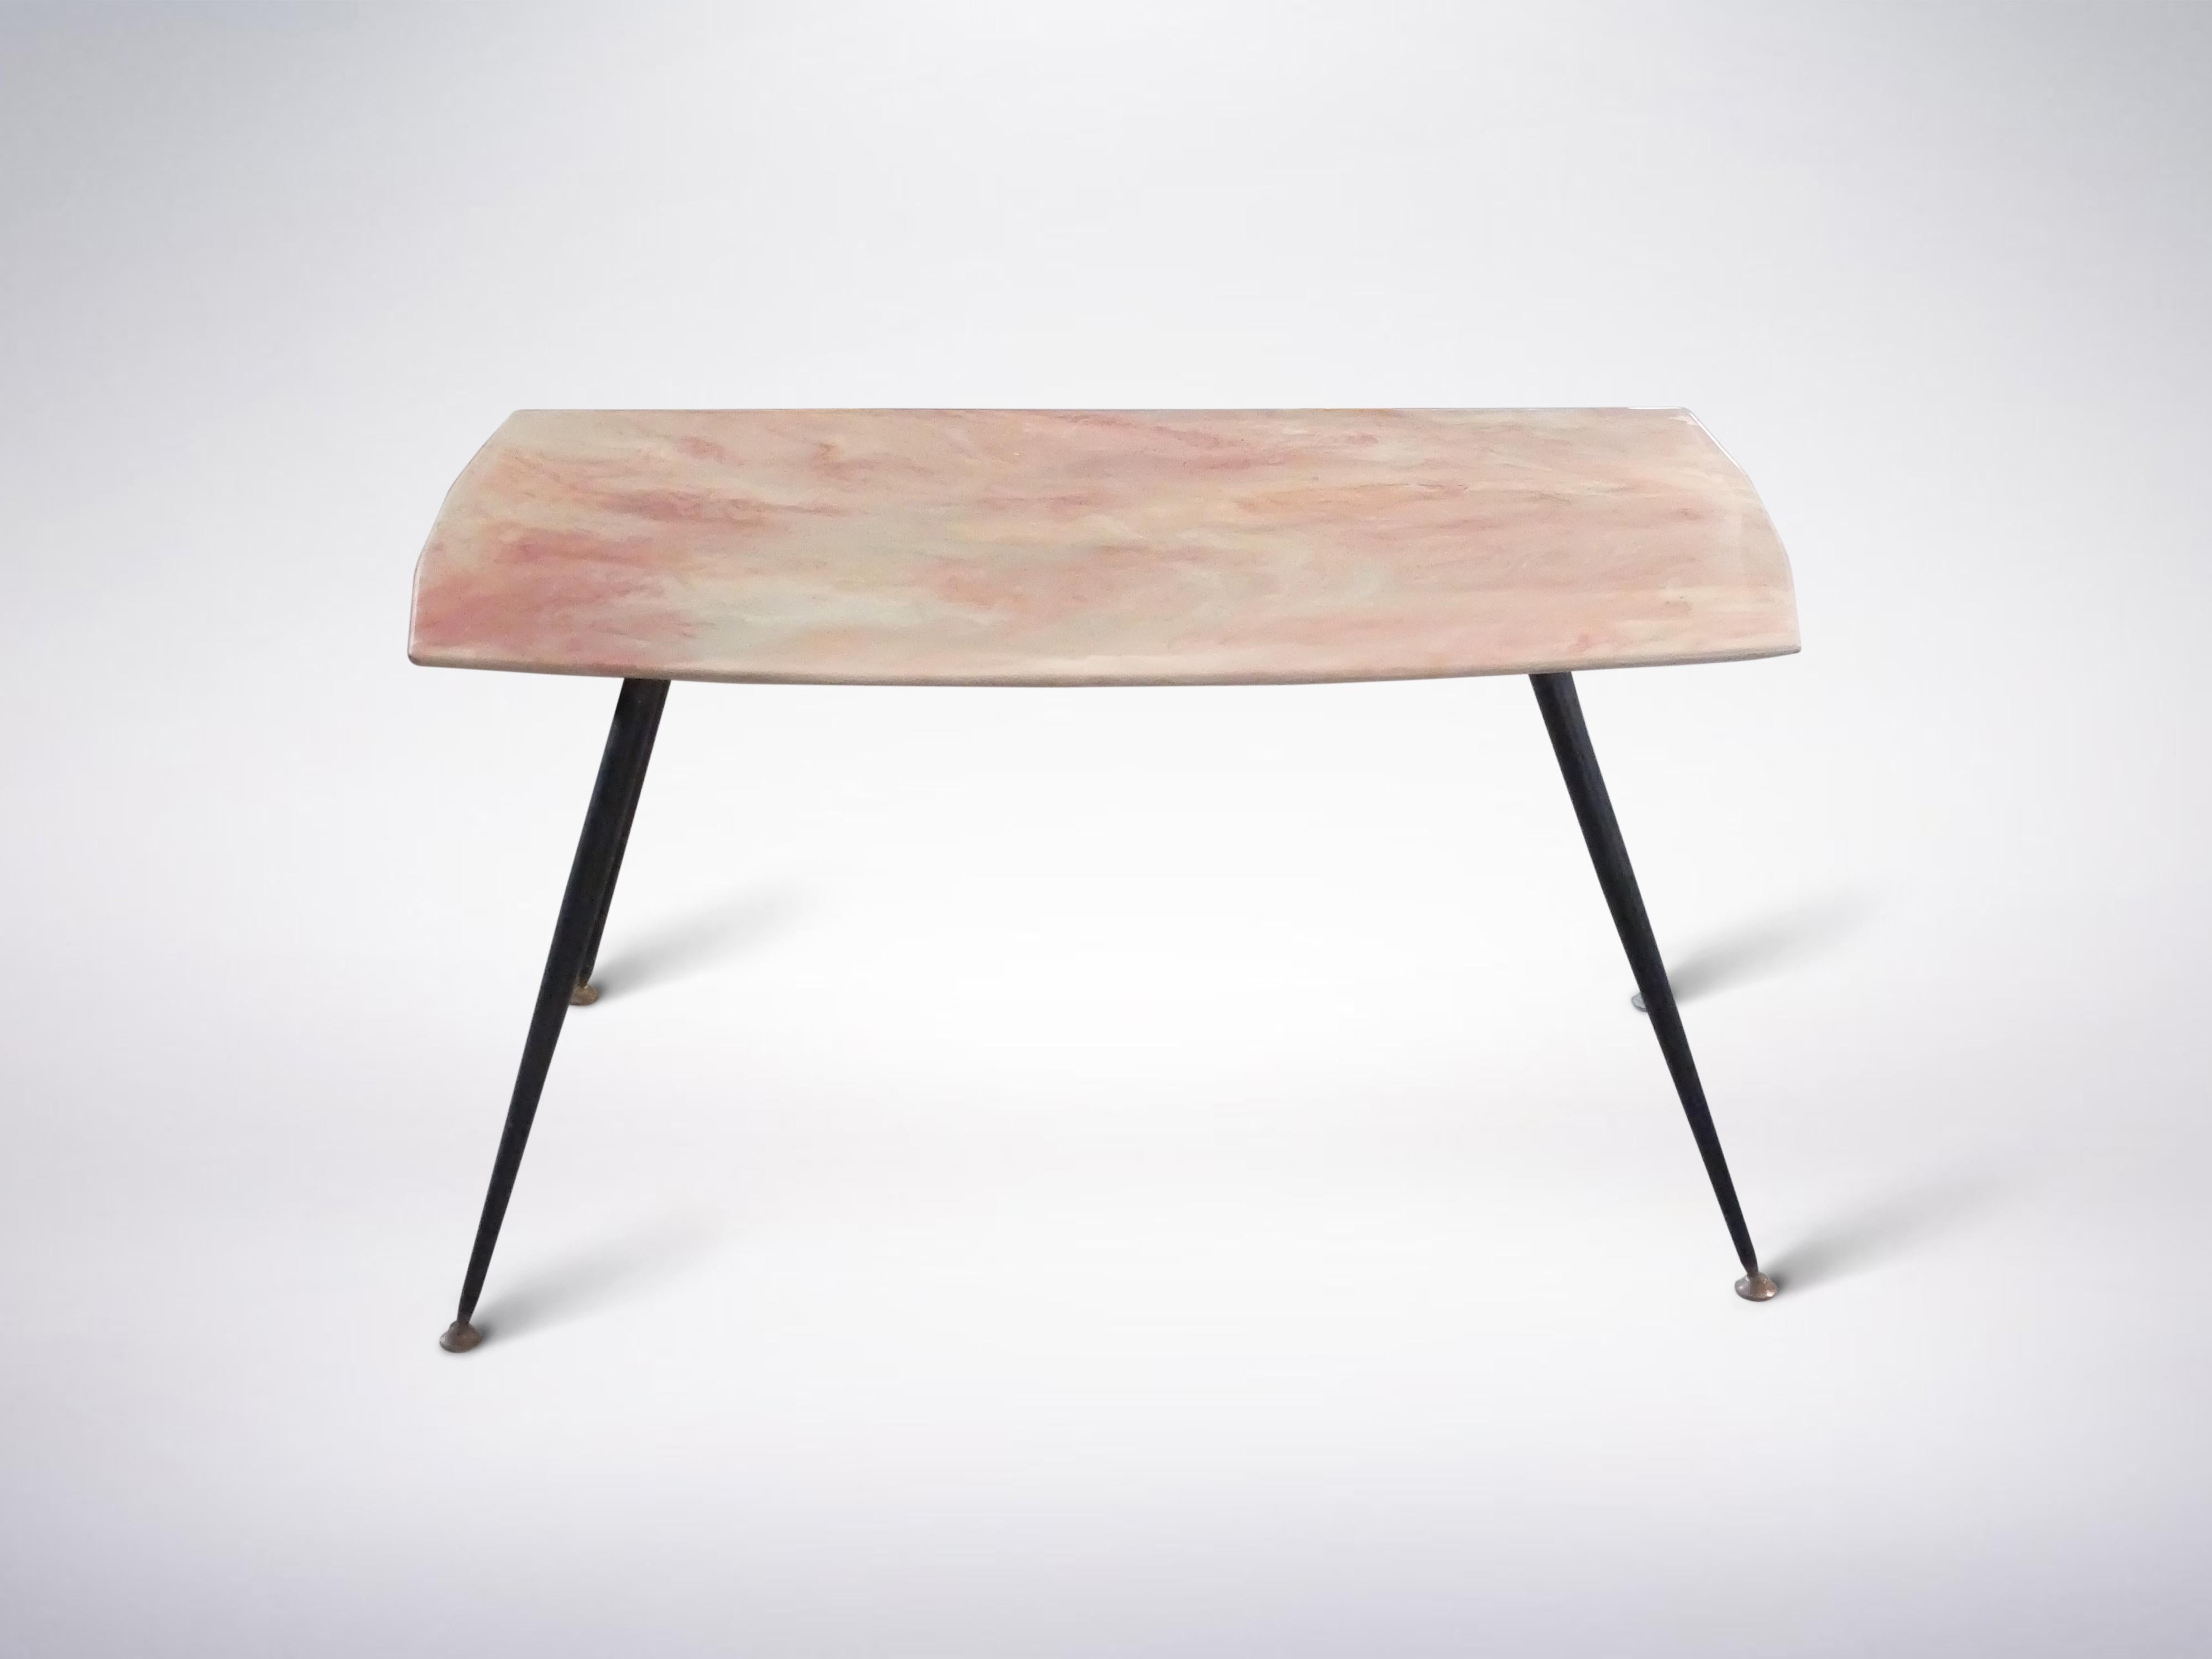 Italian Mid-Century Modern, pink marble top Coffee table in Marble, circa 1950.
This beautiful design is an eye pleaser as a centre table and as a coffee table. The simple and clear design aesthetics makes it highly functional, and versatile.